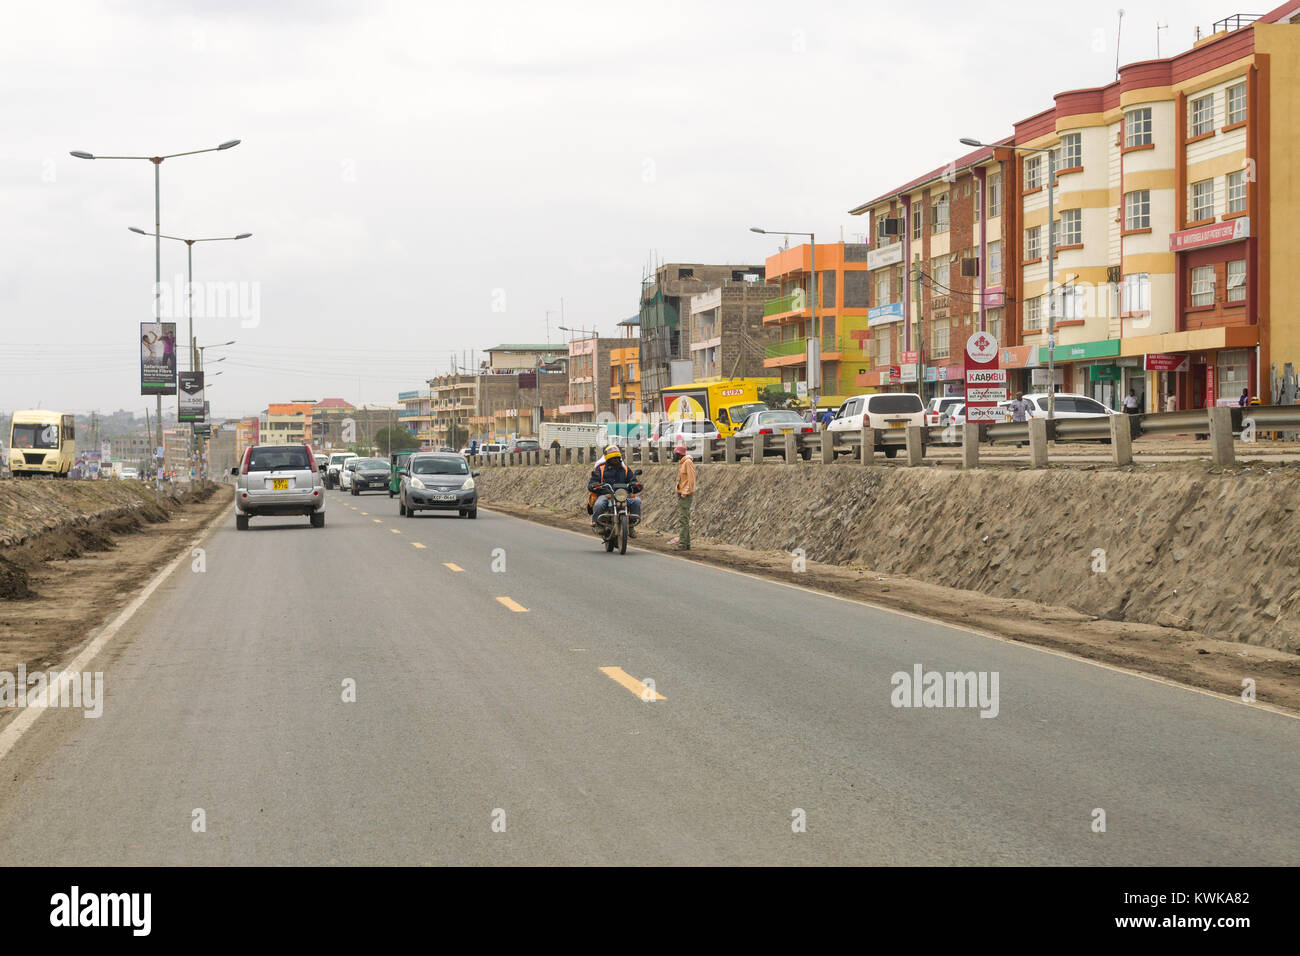 View of the main A104 road through Kitengela town with traffic and buildings, Kenya, East Africa Stock Photo